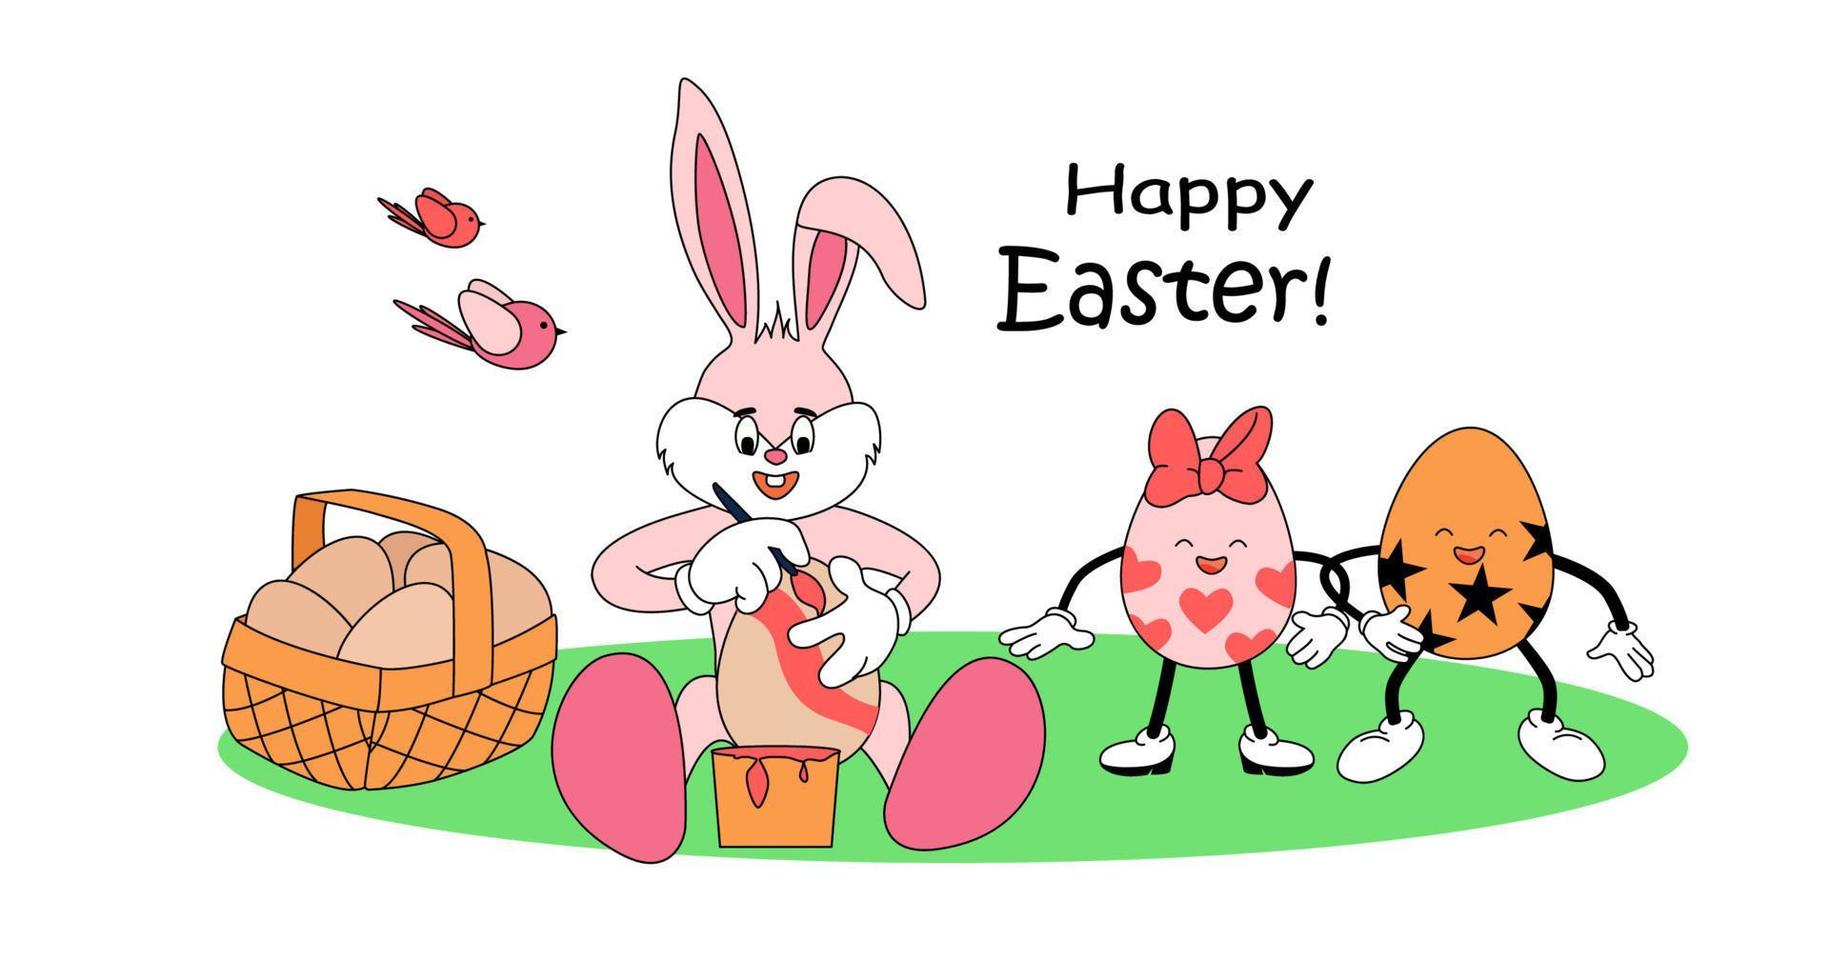 Bunny coloring an Easter egg. Painted Easter eggs are funny characters, retro atmosphere. Happy Easter lettering. Bright vector illustration